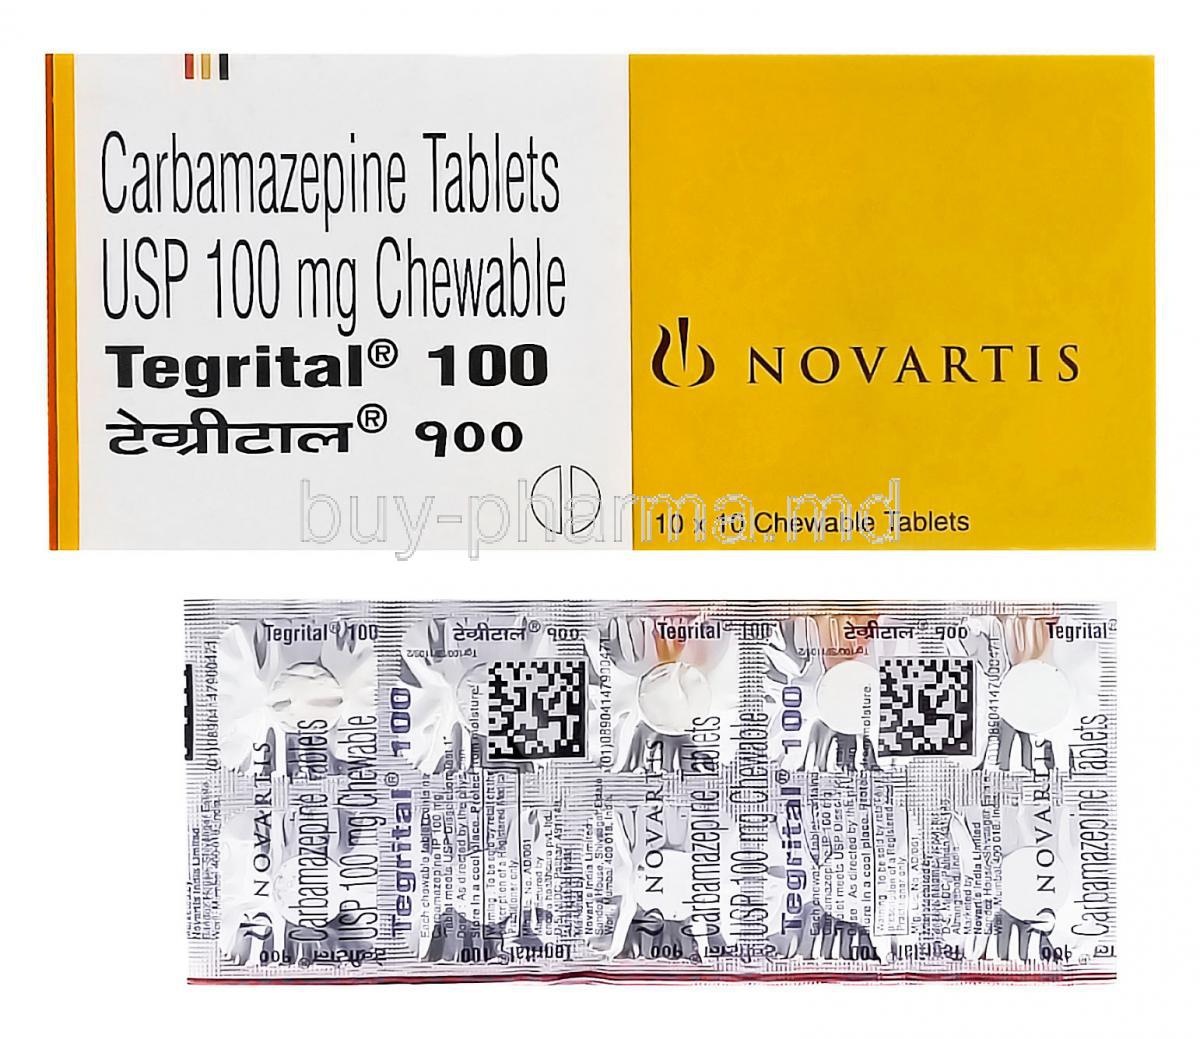 Tegrital, Carbamazepine 100mg Chewable Tablet